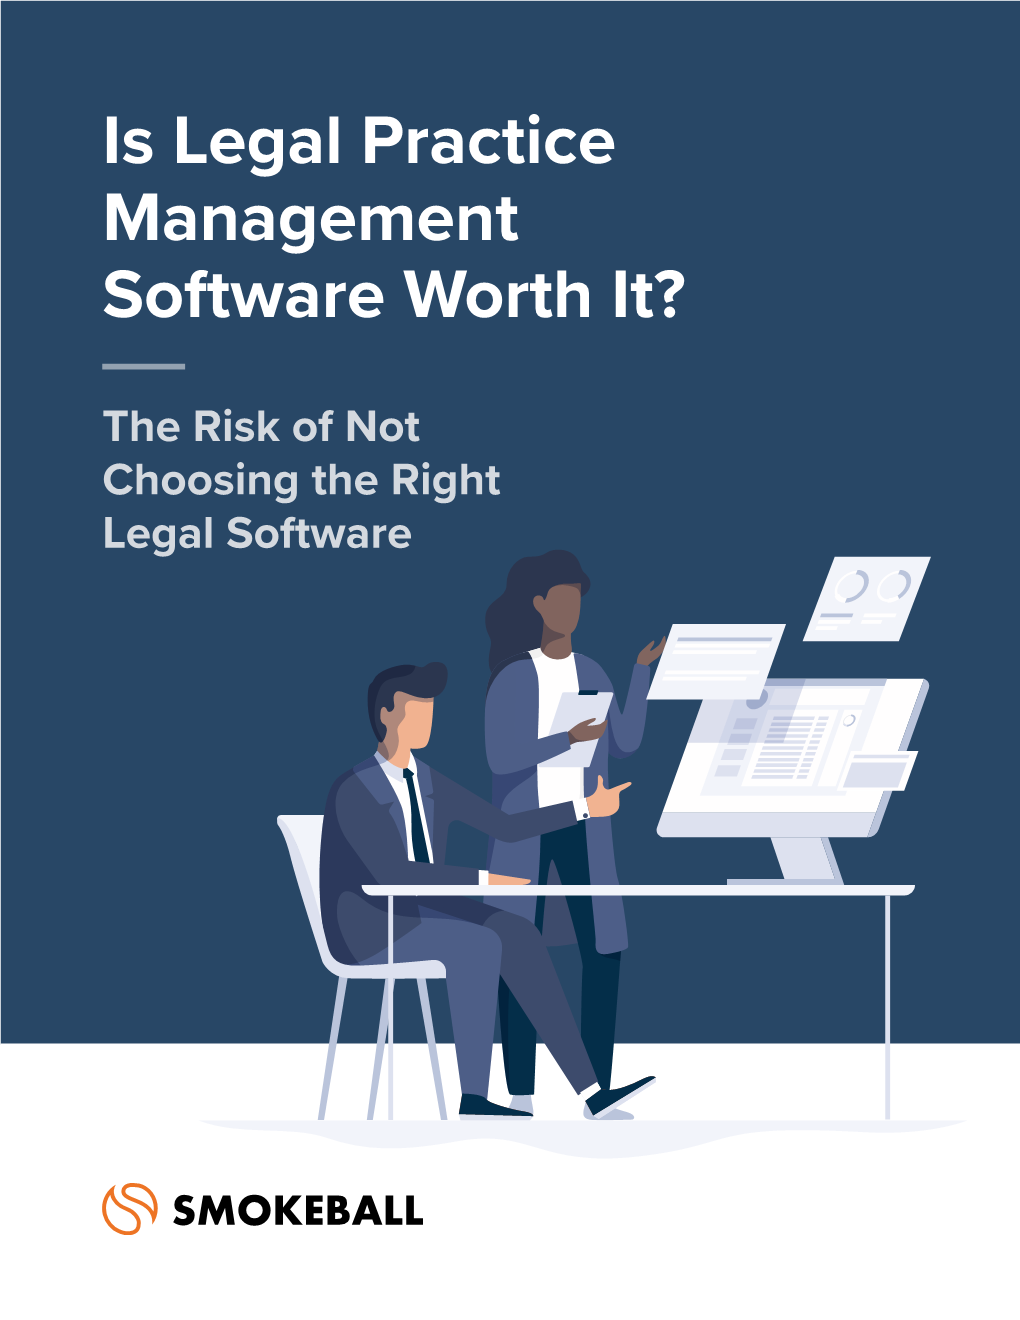 Is Legal Practice Management Software Worth It?